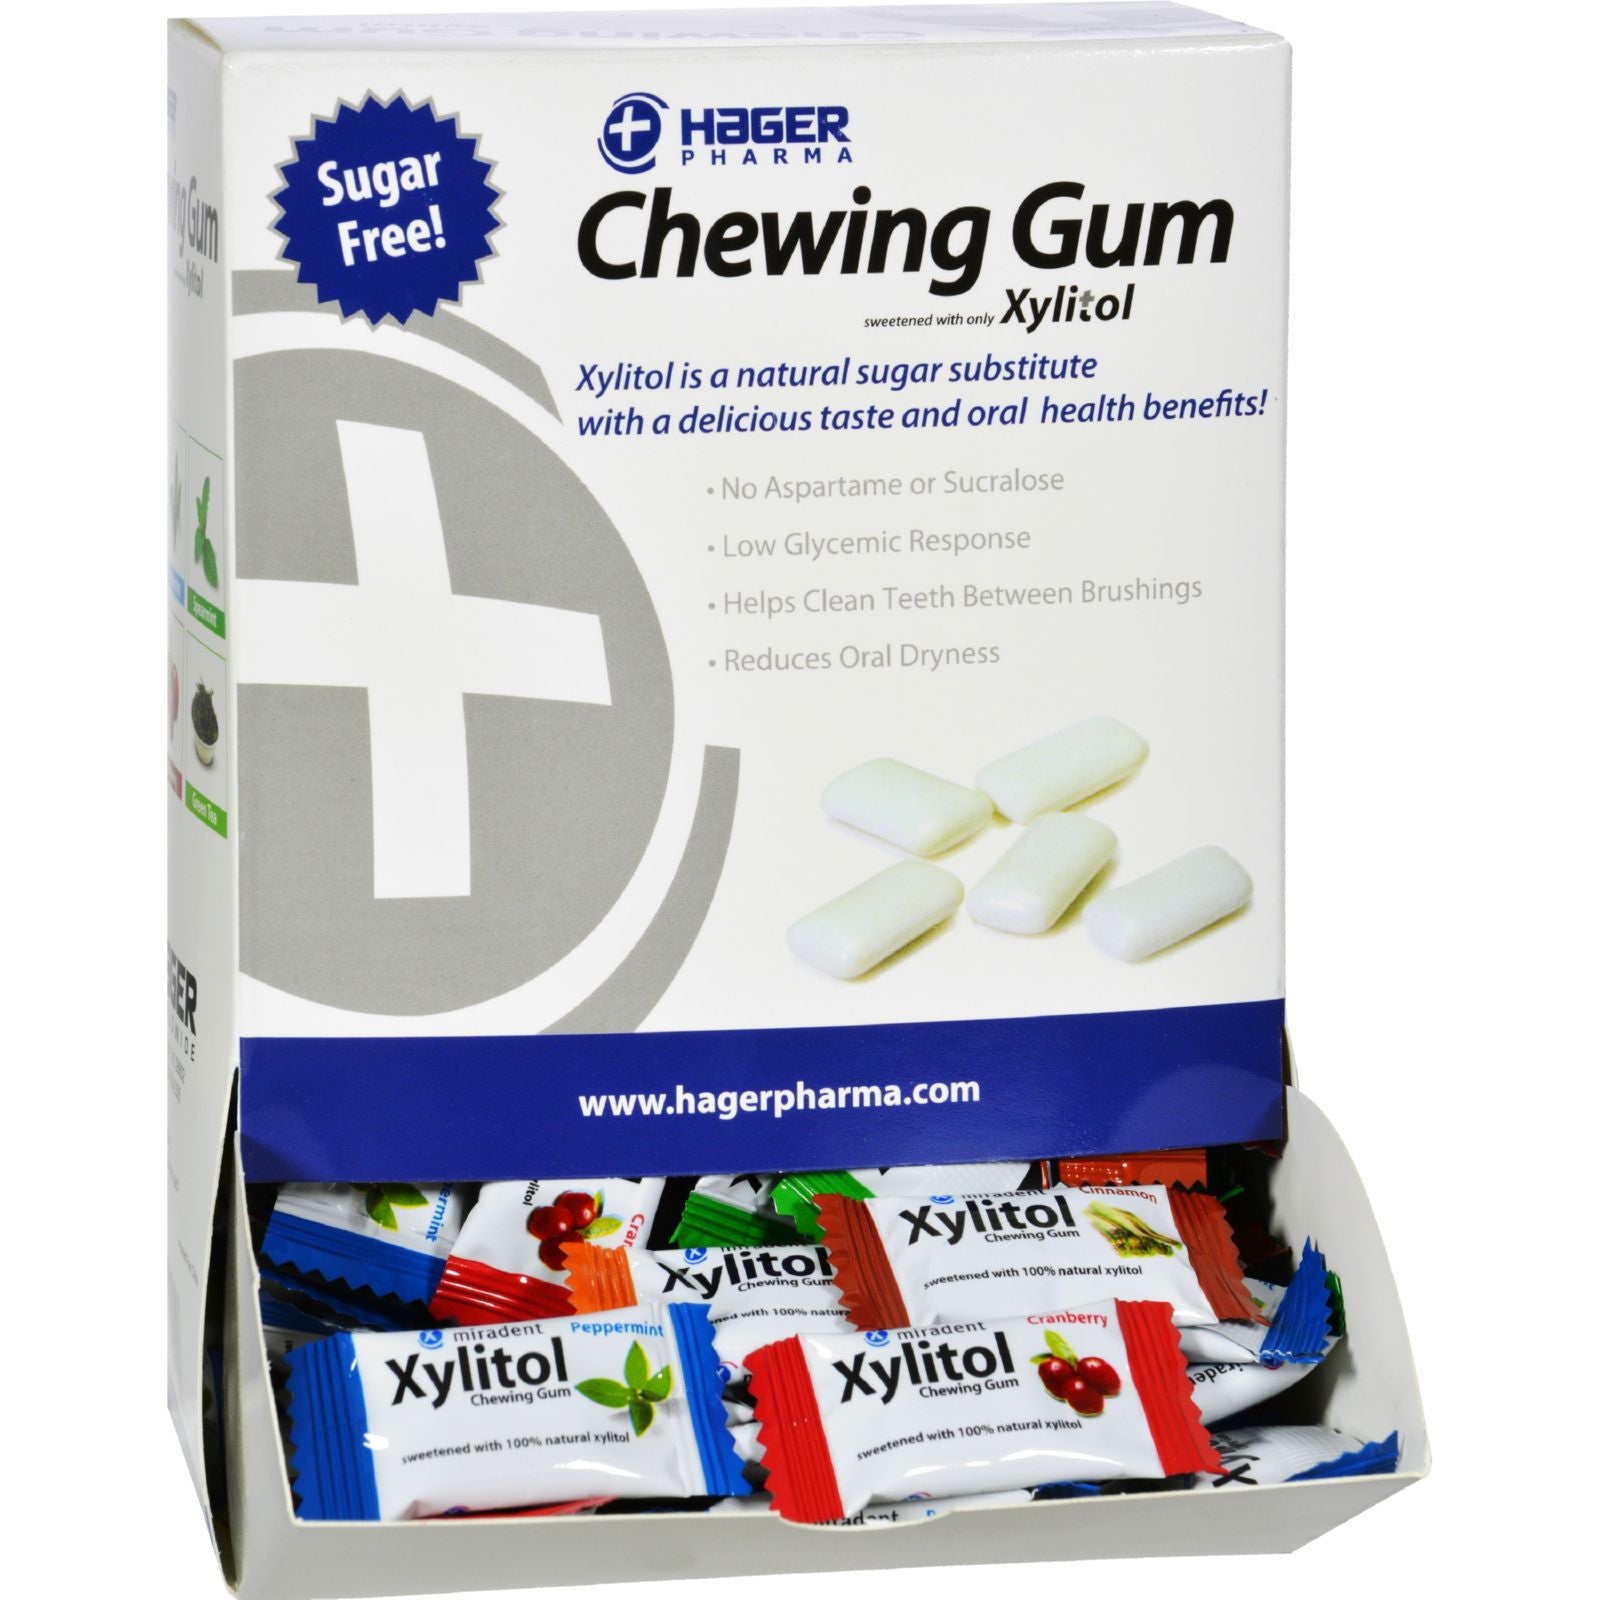 Xylitol Chewing Gum Assortment, Bag of 100